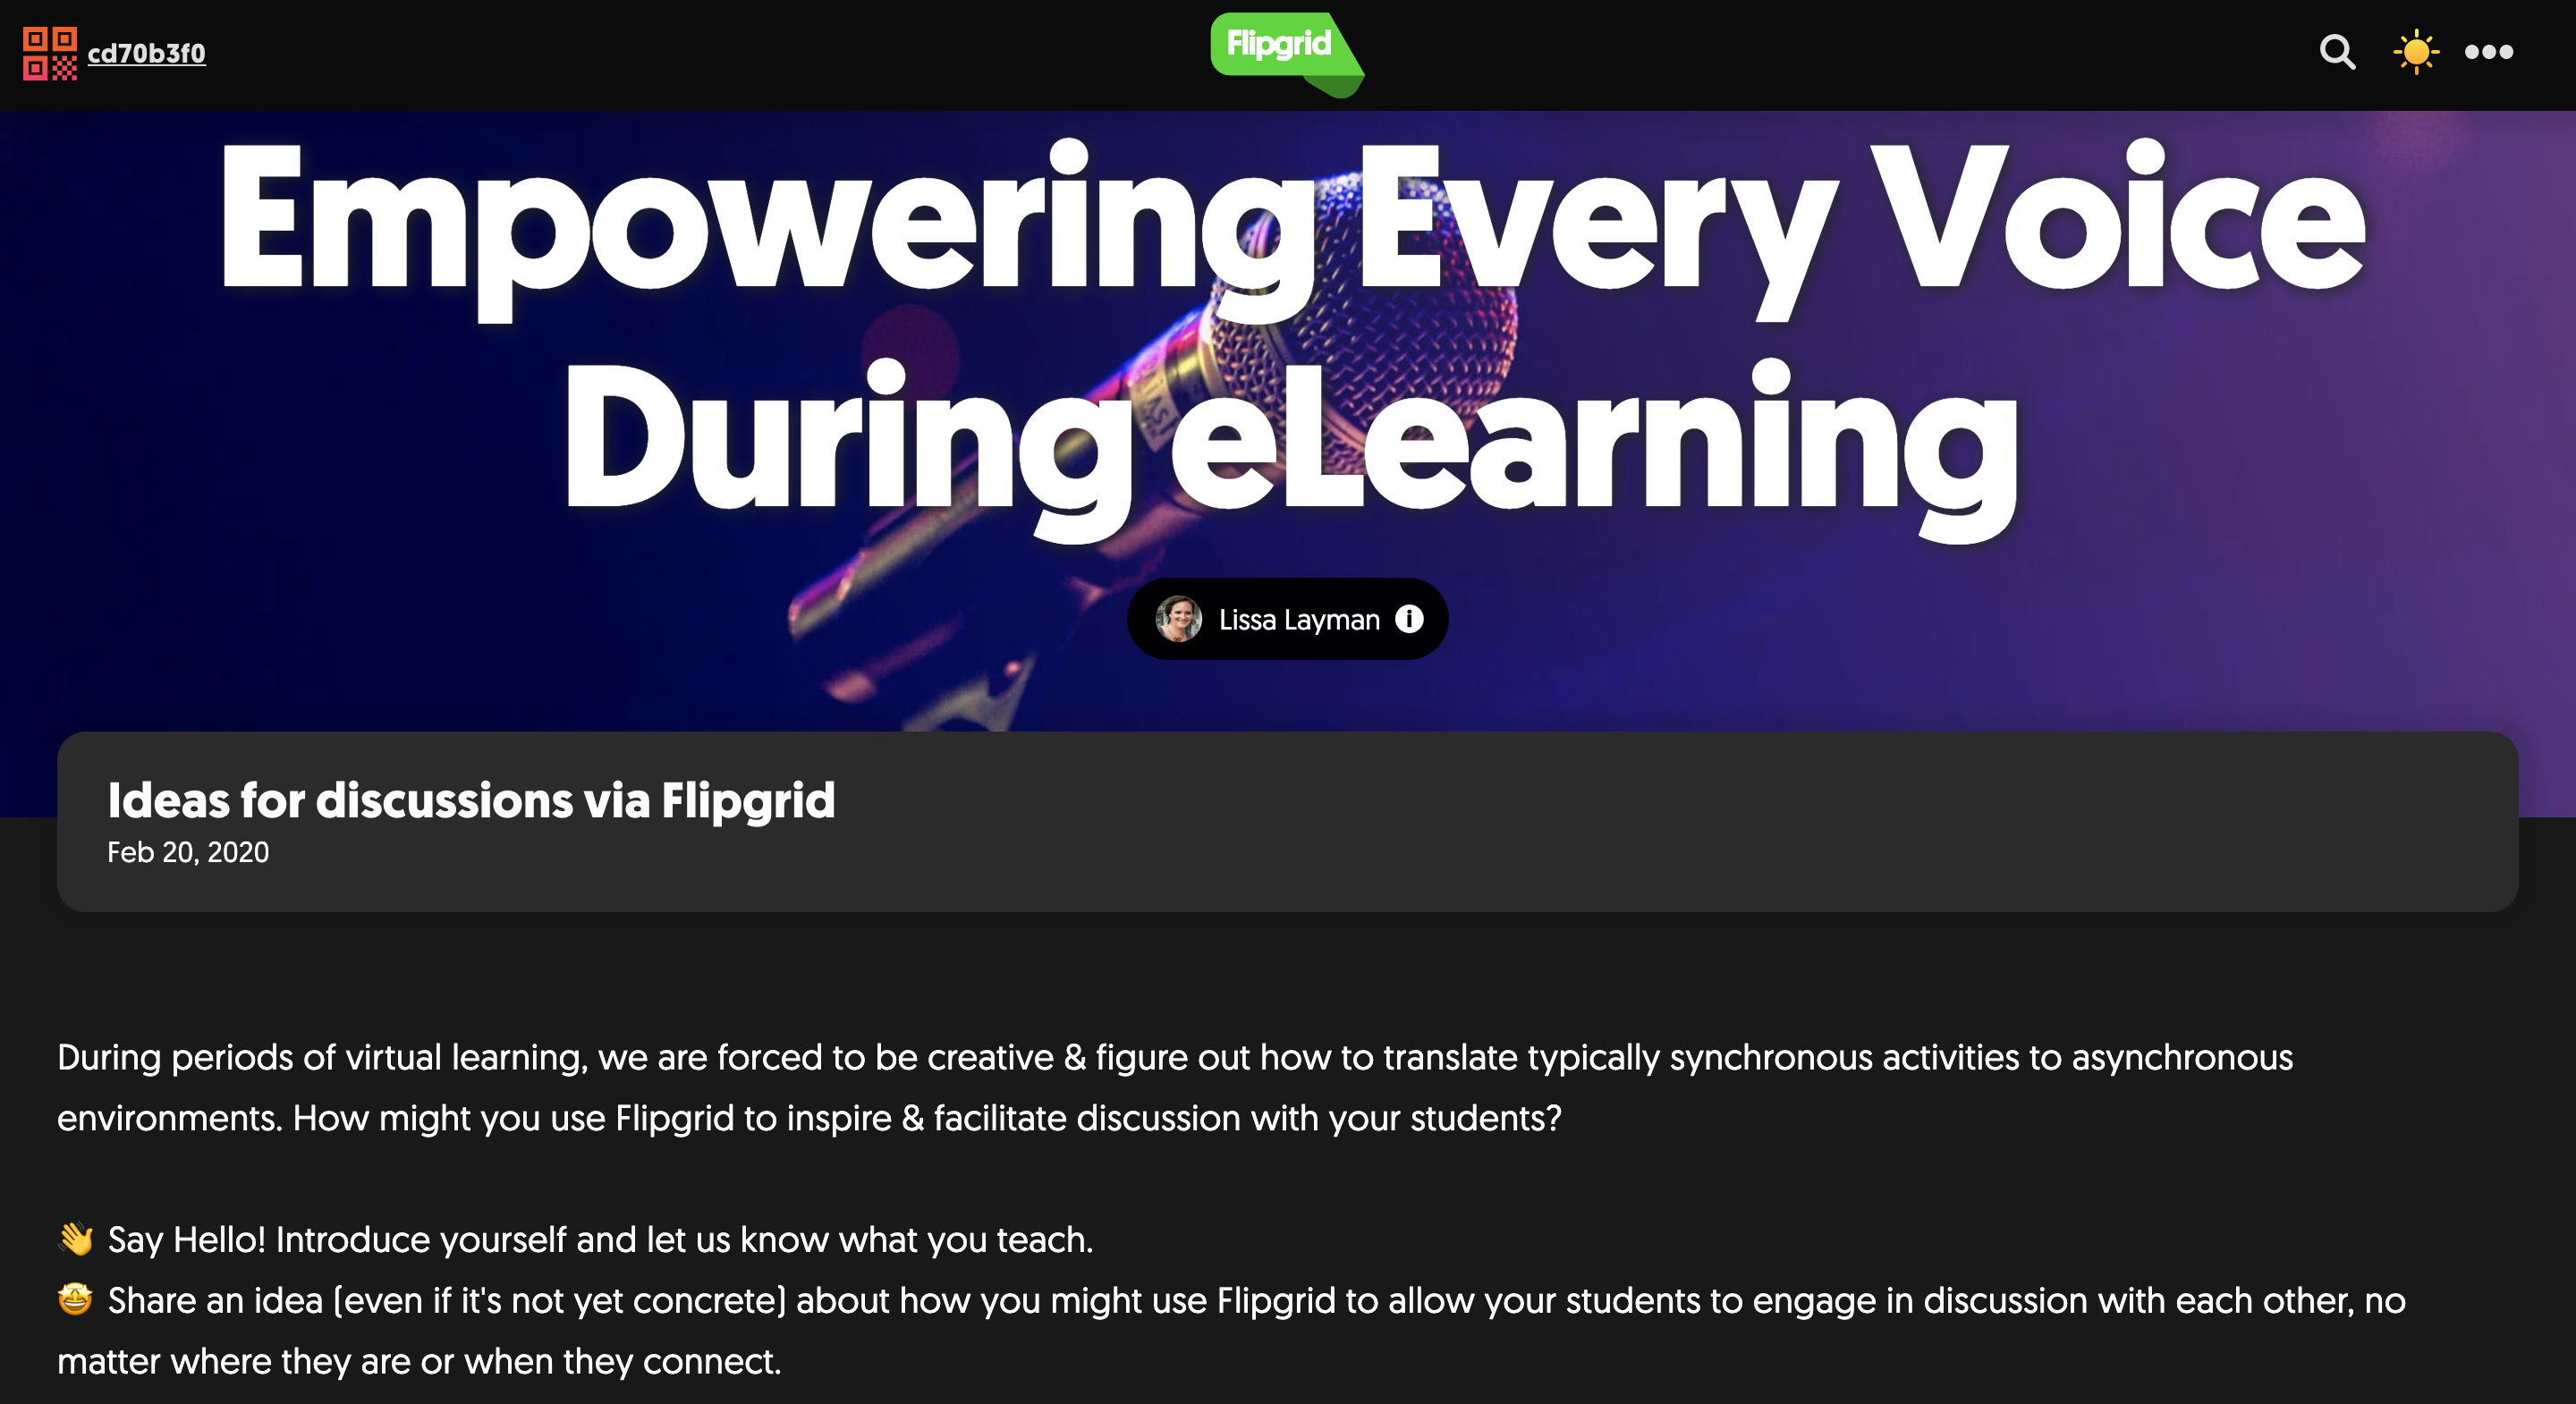 Empowering Every Voice During eLearning